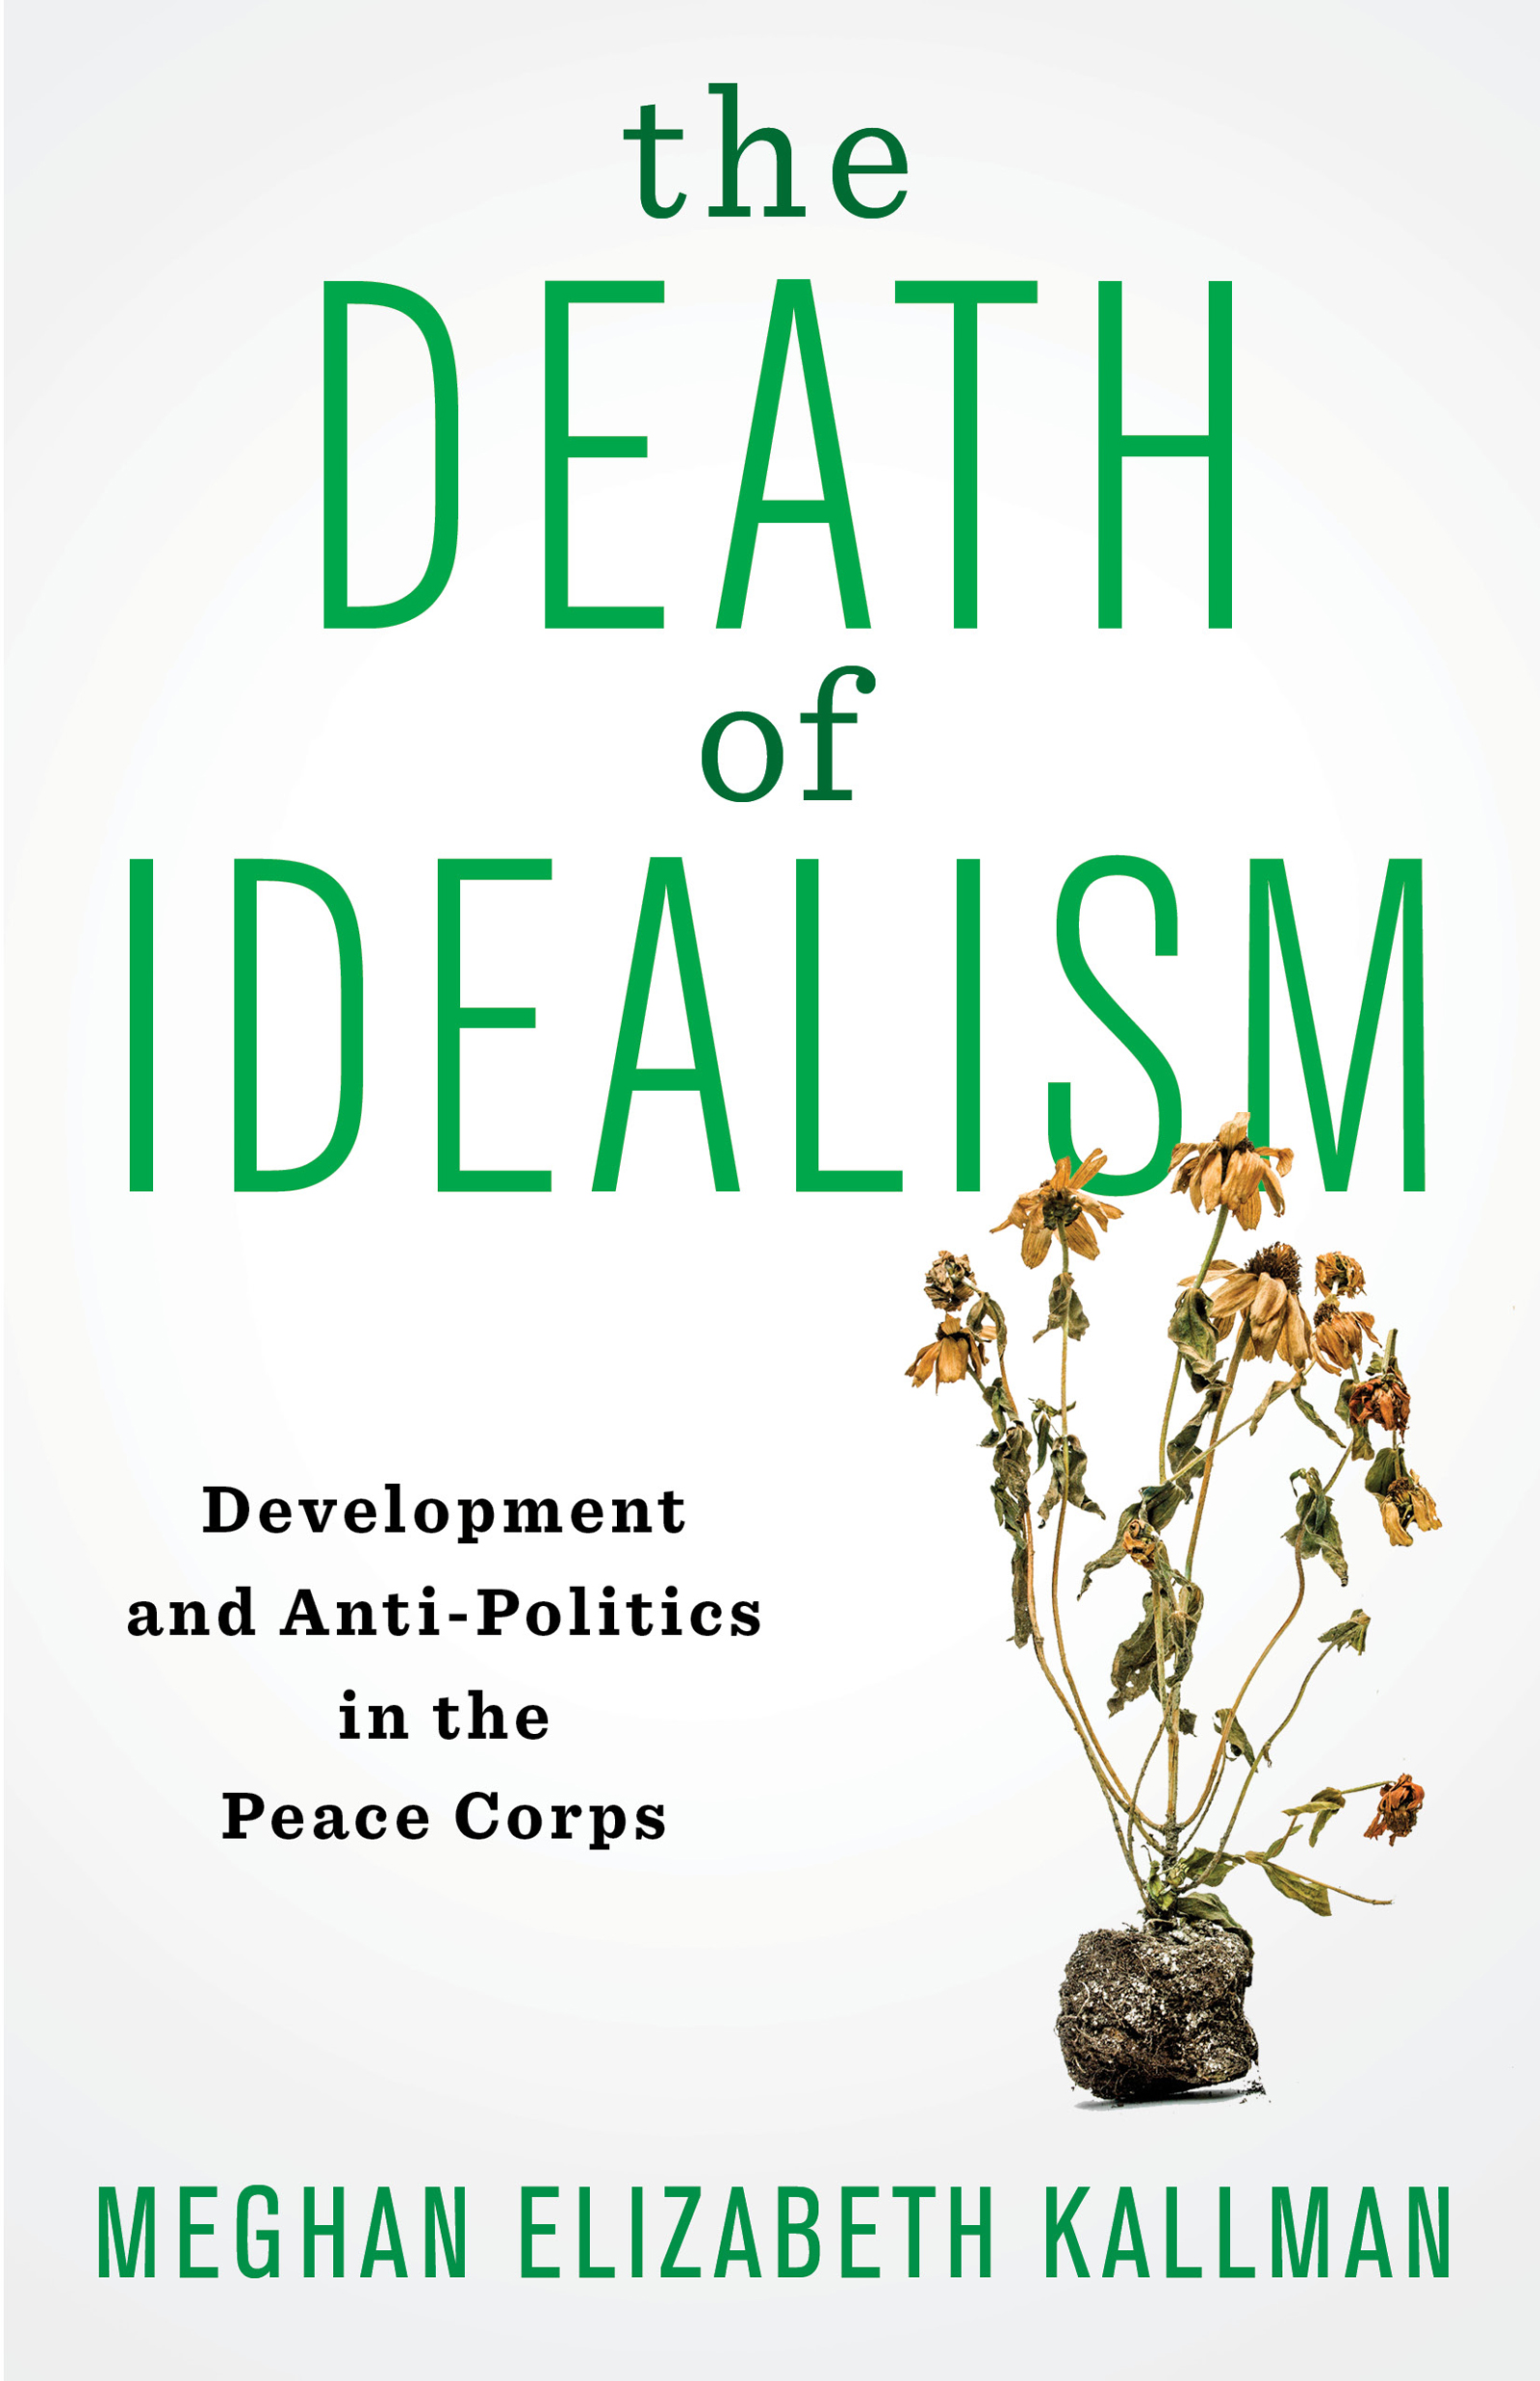 THE DEATH OF IDEALISM THE DEATH OF IDEALISM DEVELOPMENT AND ANTI-POLITICS - photo 1